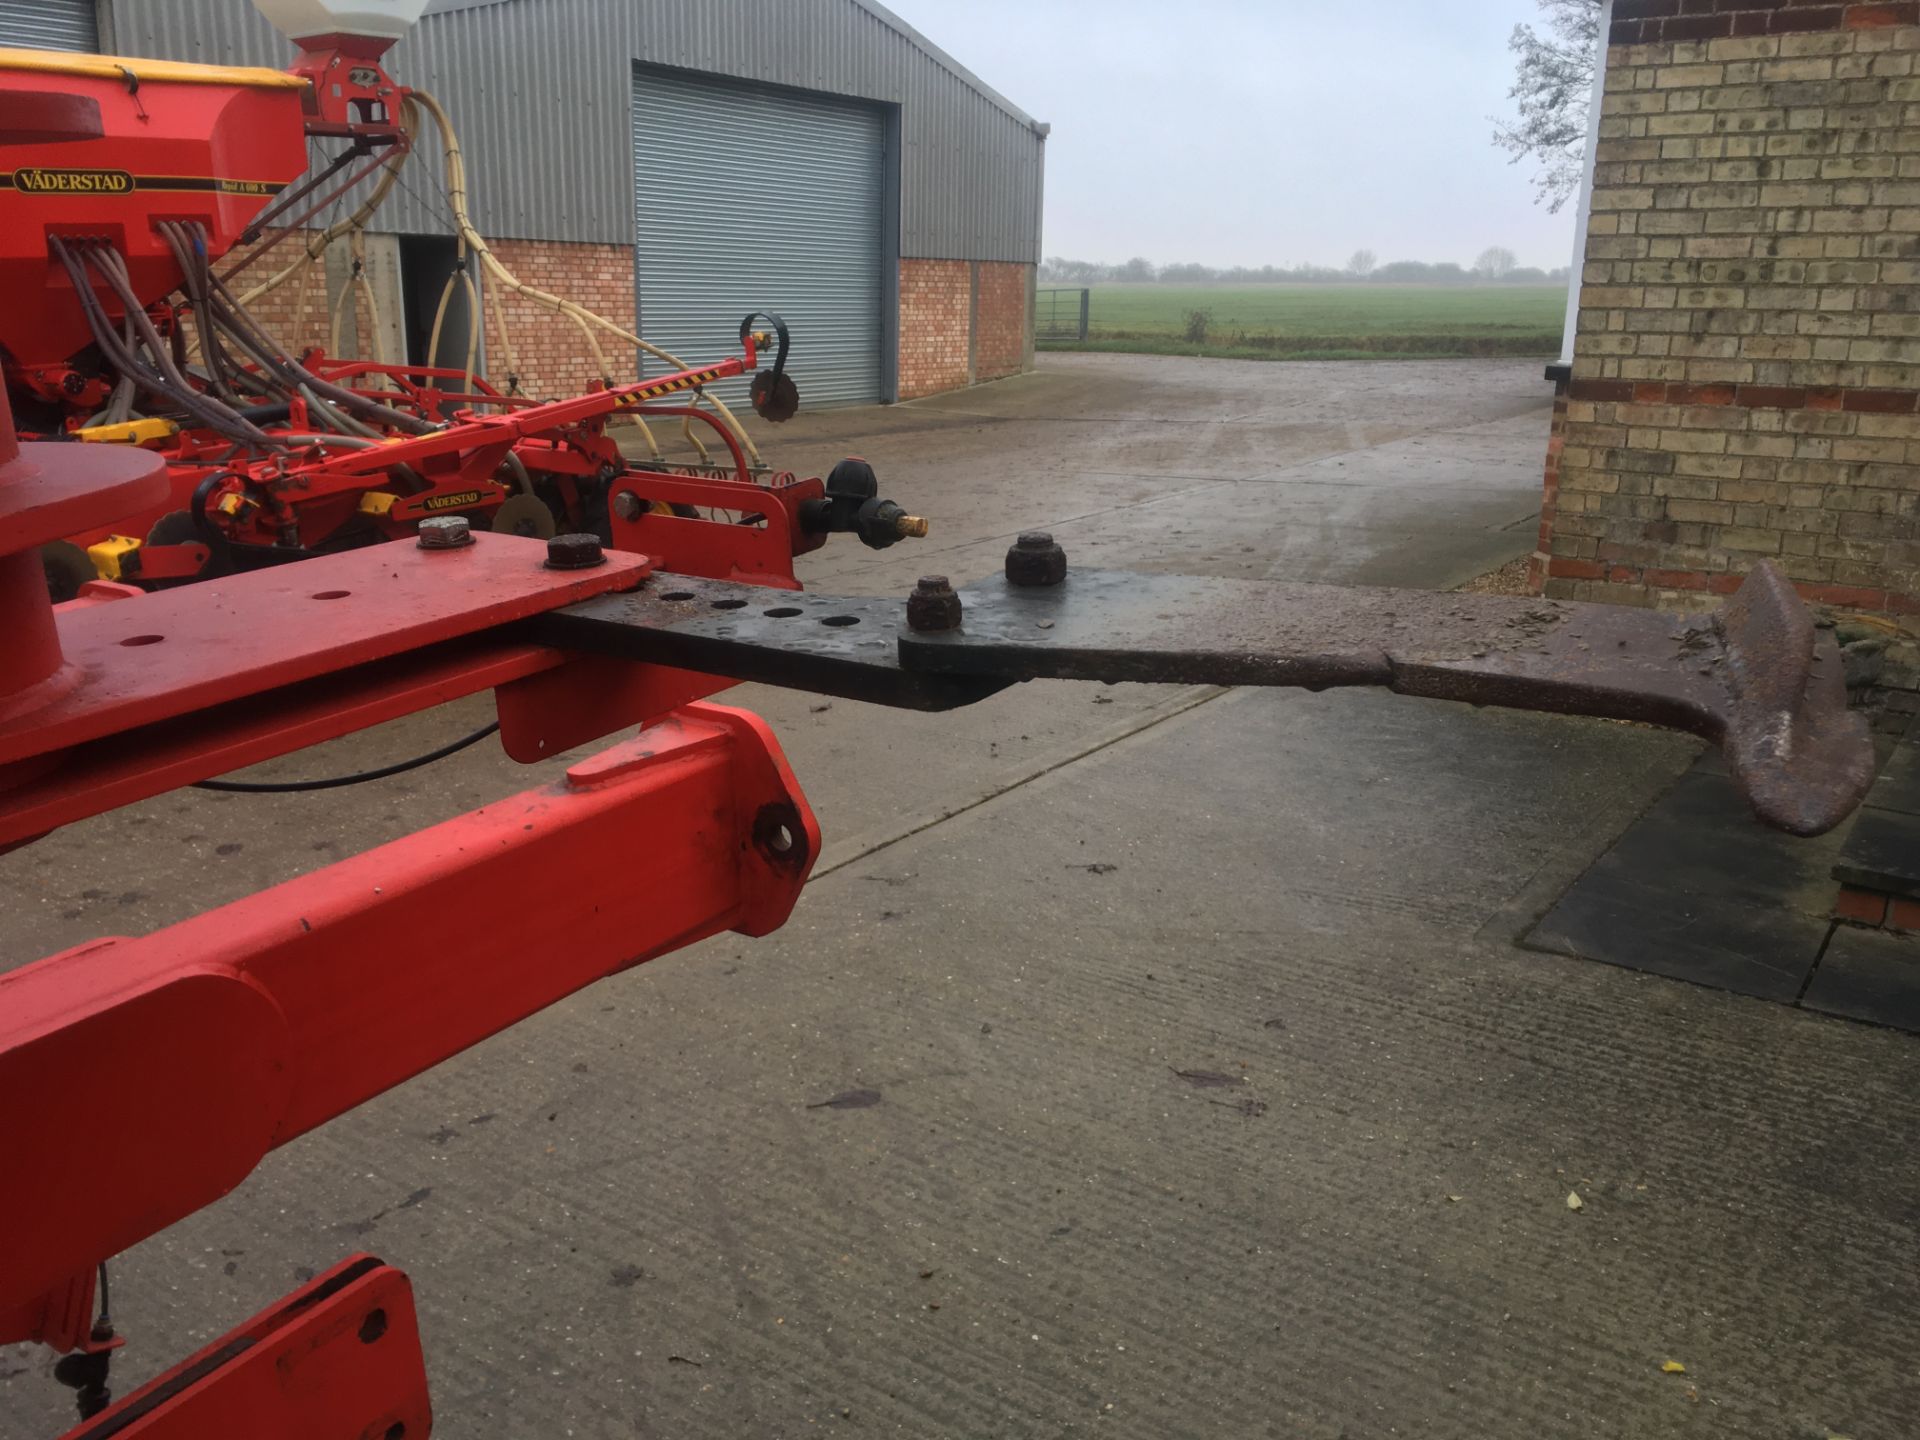 Vaderstad Rapid A600S Drill (07), Serial No. 14277, Location - Sandy, Bedfordshire - Image 10 of 11